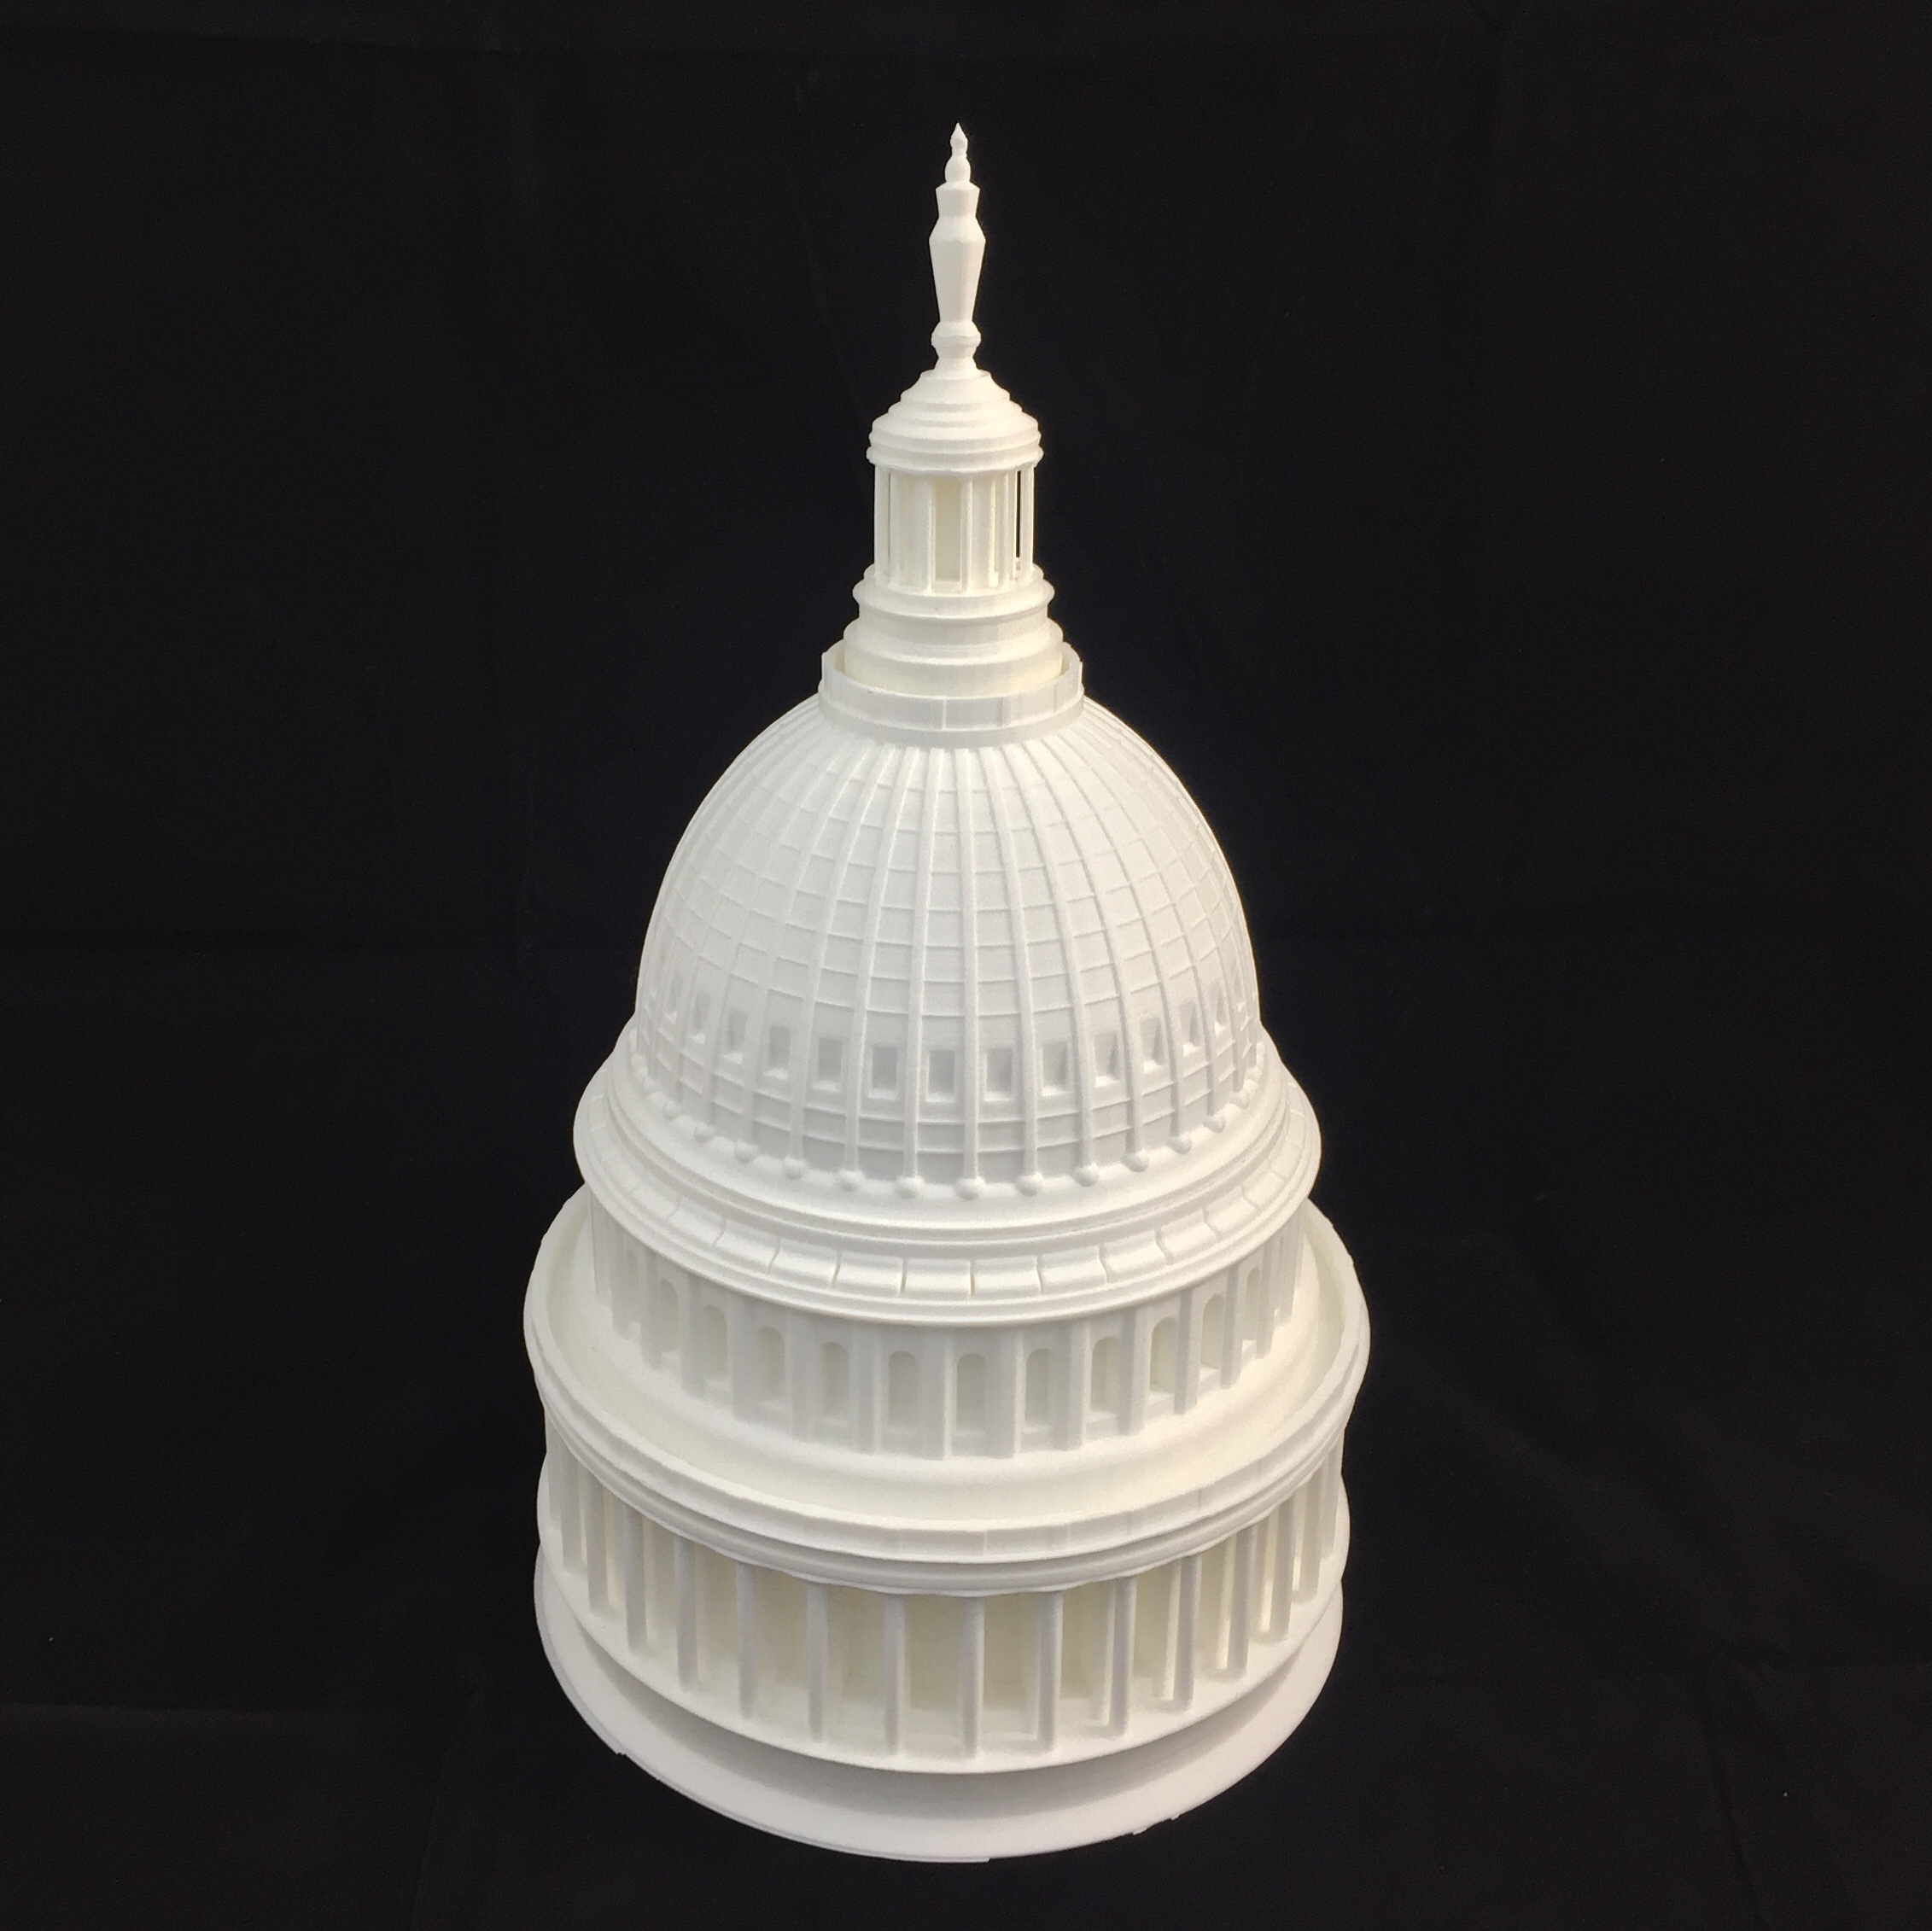 2018 - One of the nine 3D-printed table lamps I made on order for a wedding in Washington DC.